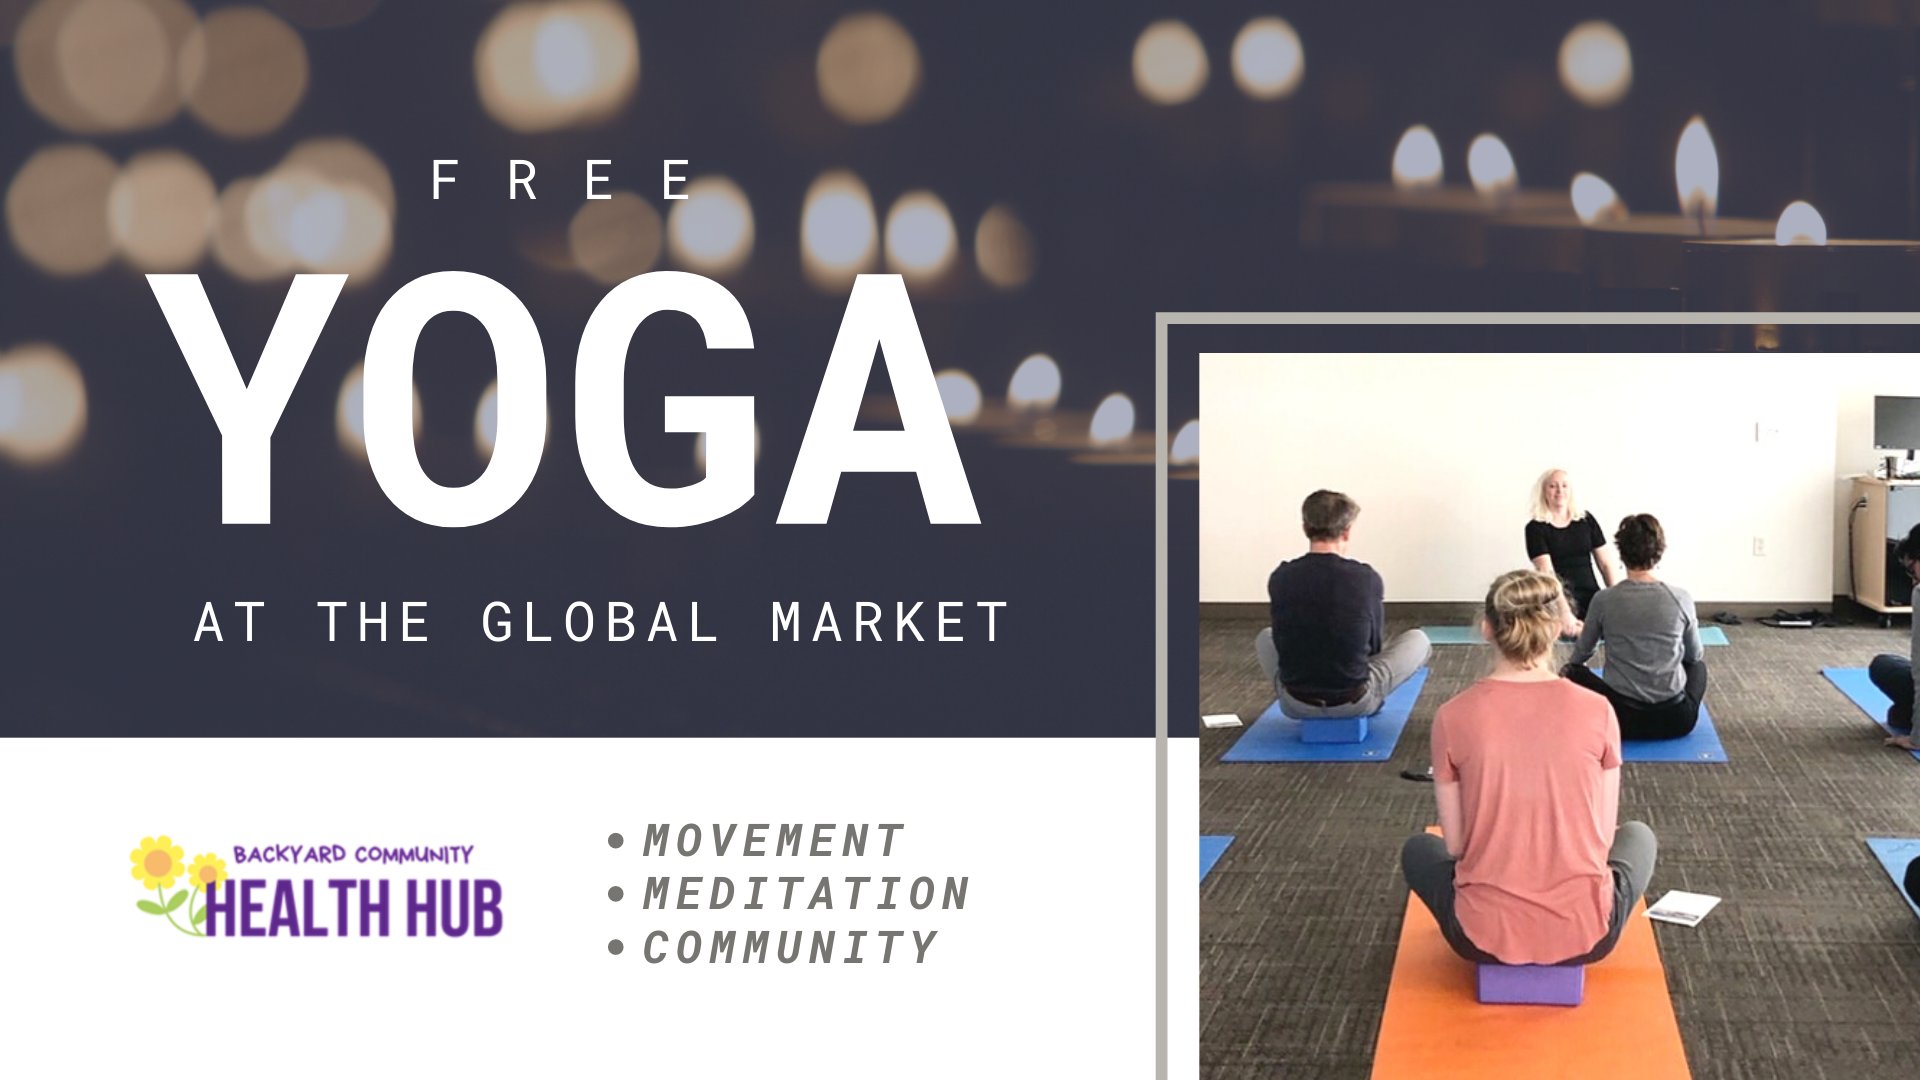 Free Yoga at the Global Market